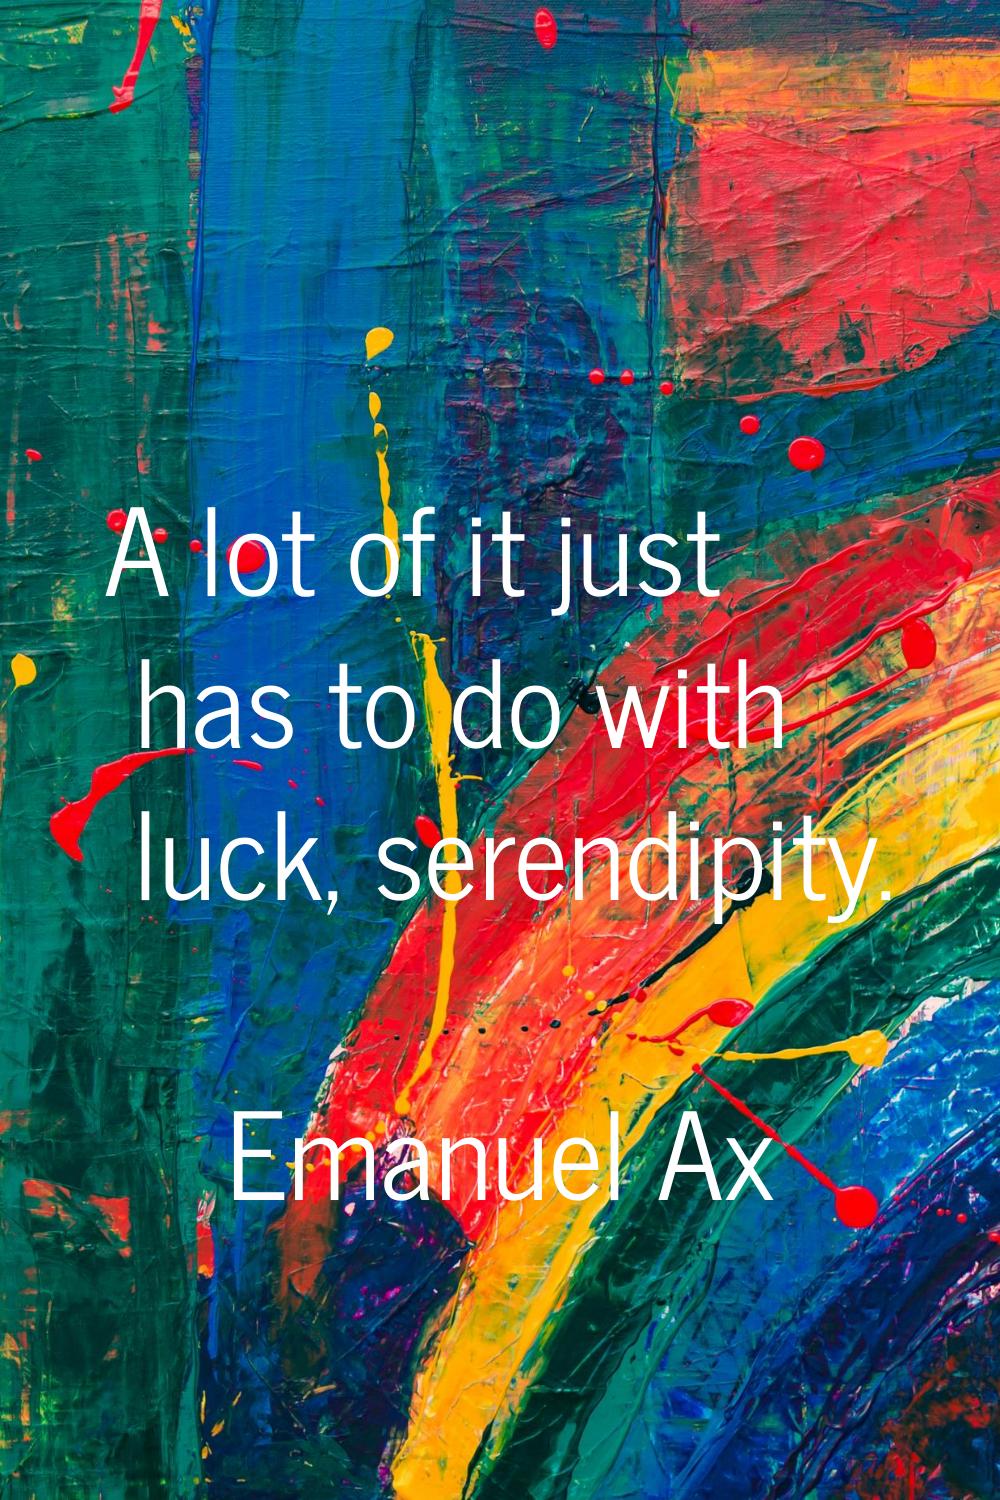 A lot of it just has to do with luck, serendipity.